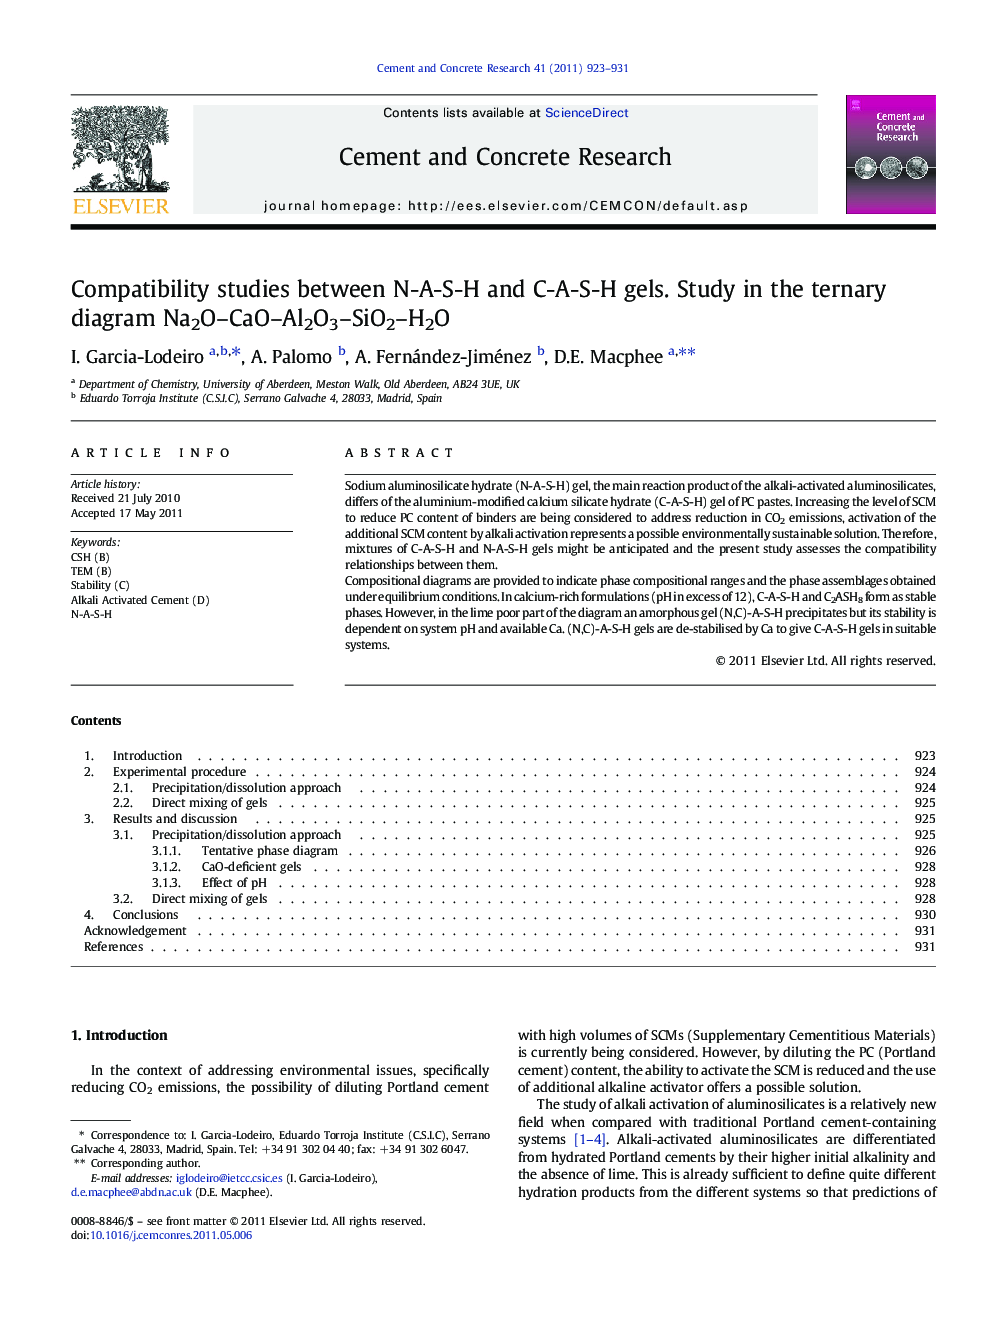 Compatibility studies between N-A-S-H and C-A-S-H gels. Study in the ternary diagram Na2O–CaO–Al2O3–SiO2–H2O